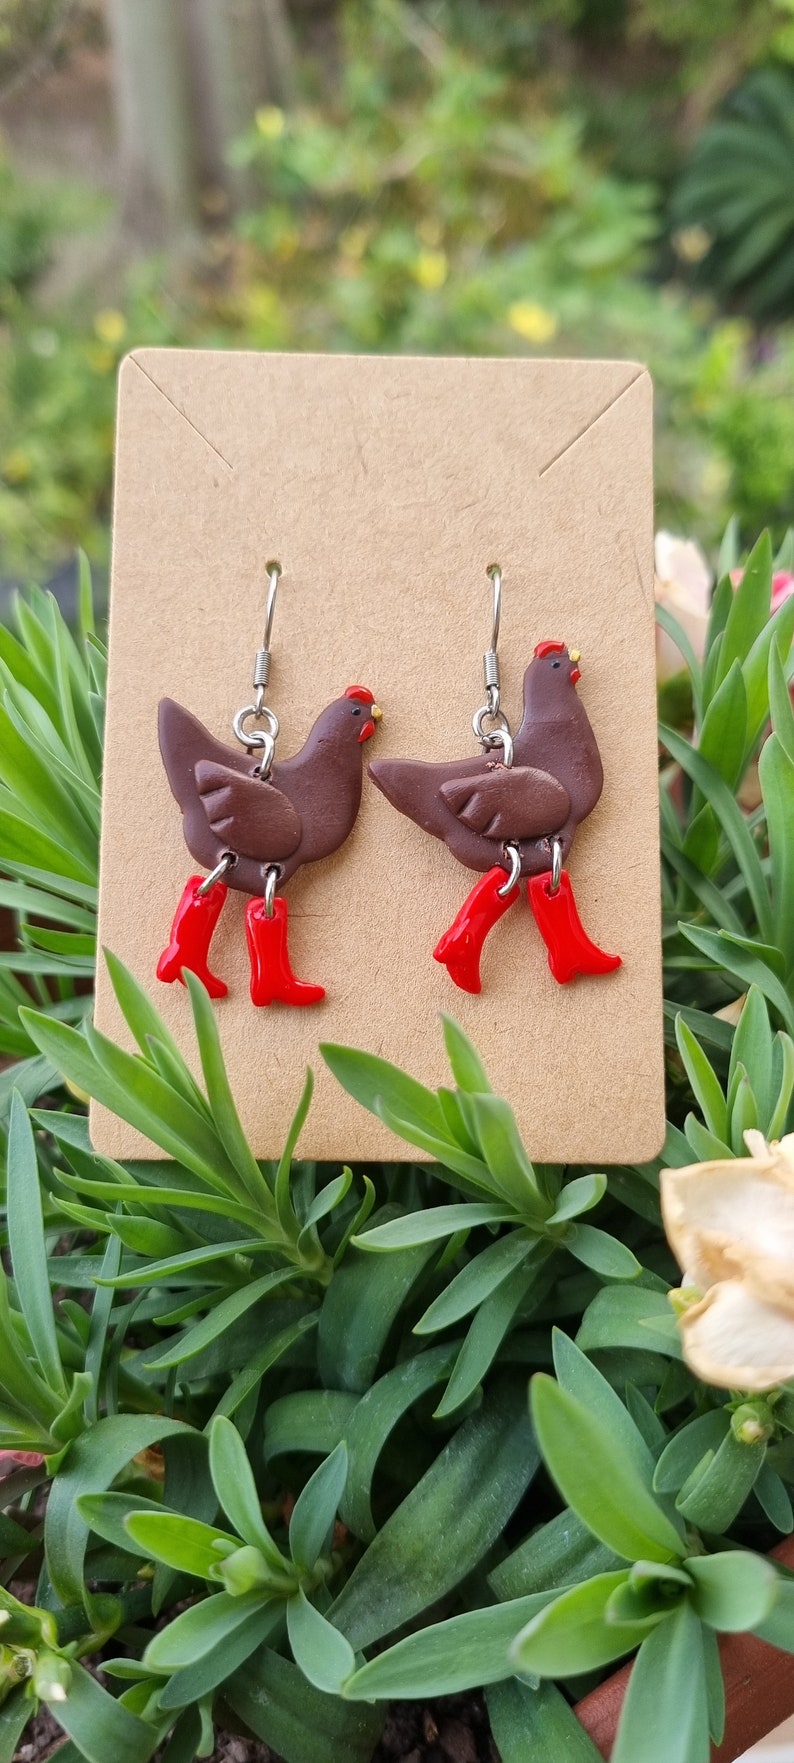 Funny Chickens, Cocottes in Rain Boots, Free Range Chicken France, Paris Olympic Games Gift, Let's go to the Olympics My Cocotte : Poulette Chocolat